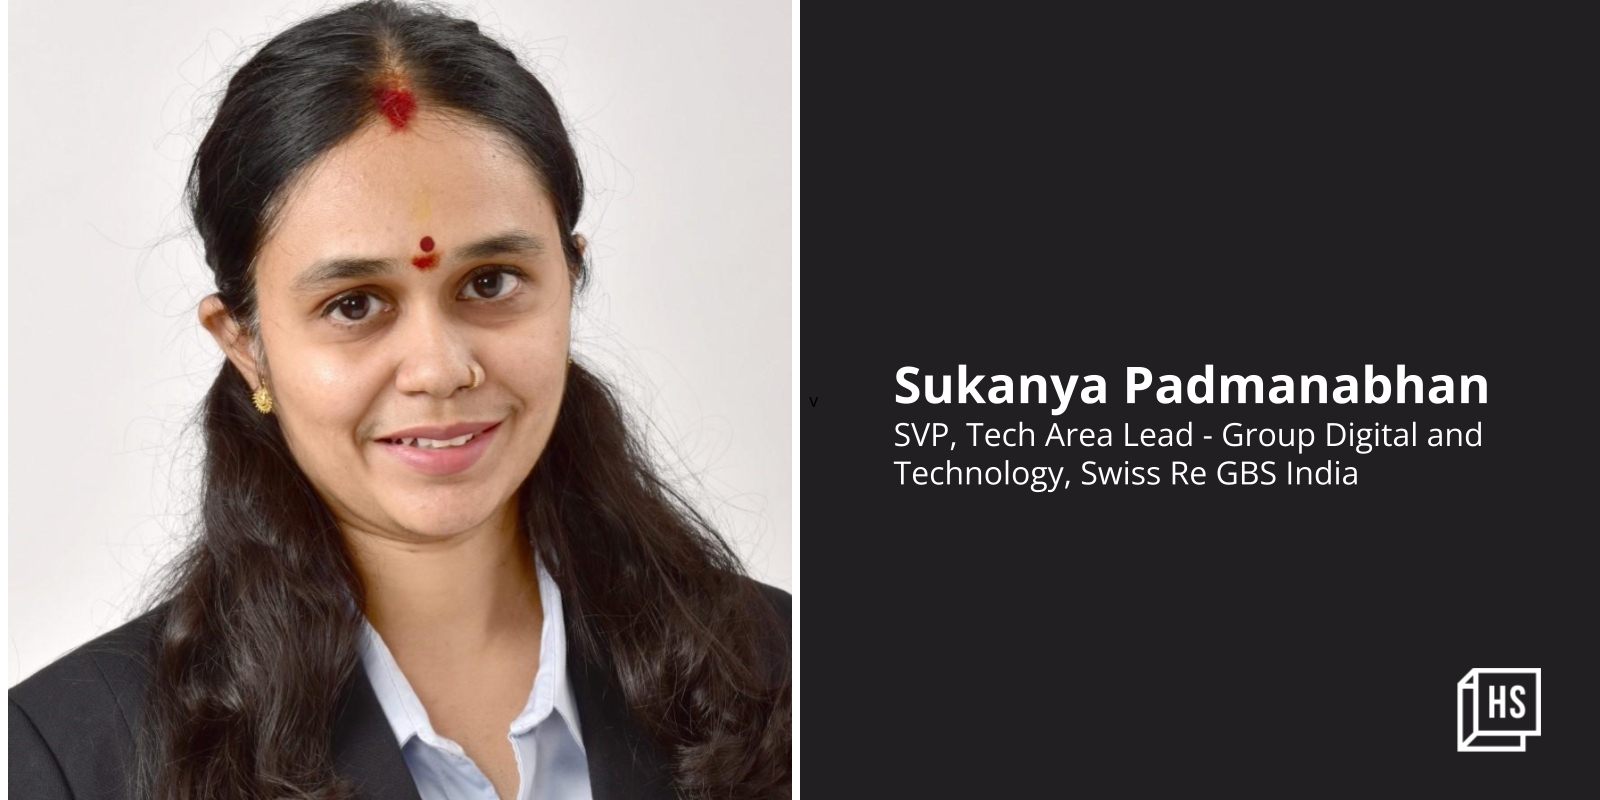 Leadership is about the way we connect with each other, says Sukanya Padmanabhan of Swiss Re GBS India